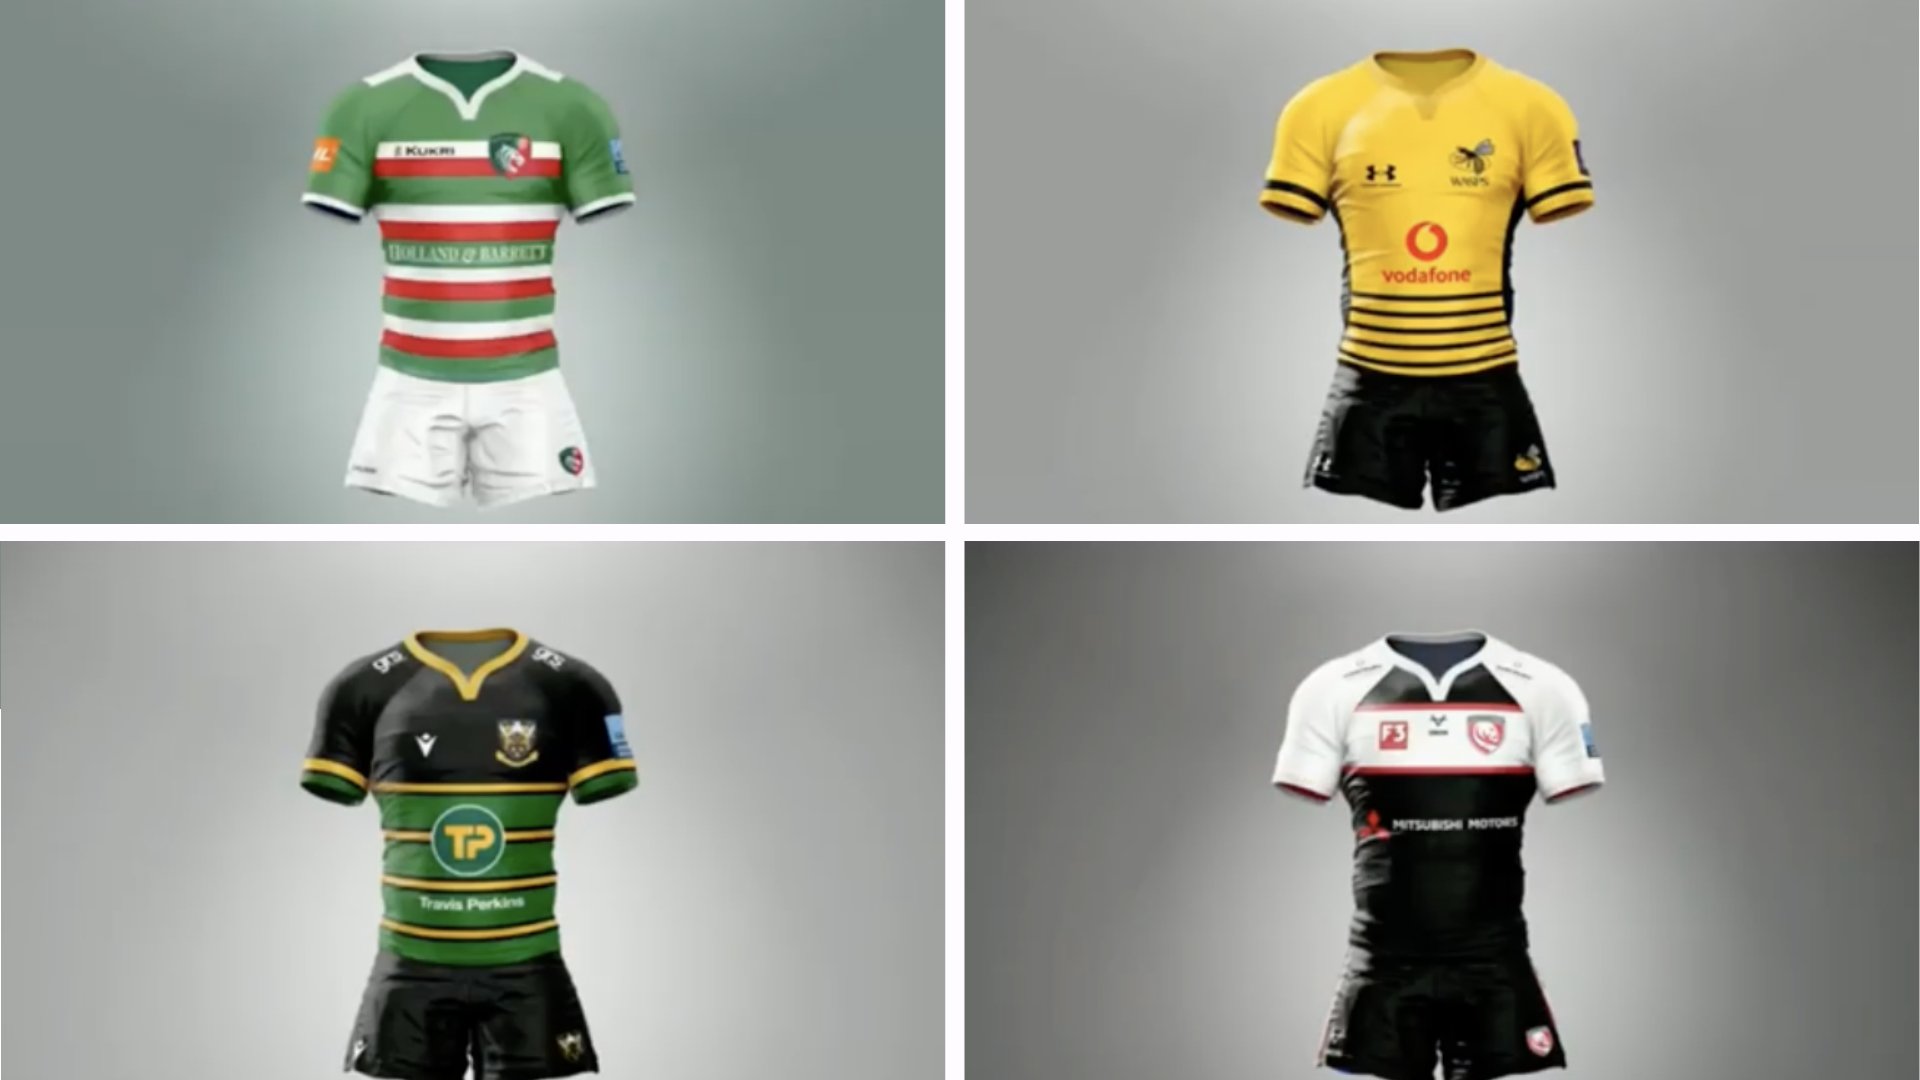 Someone has designed kits for all the Premiership teams and they are UNREAL